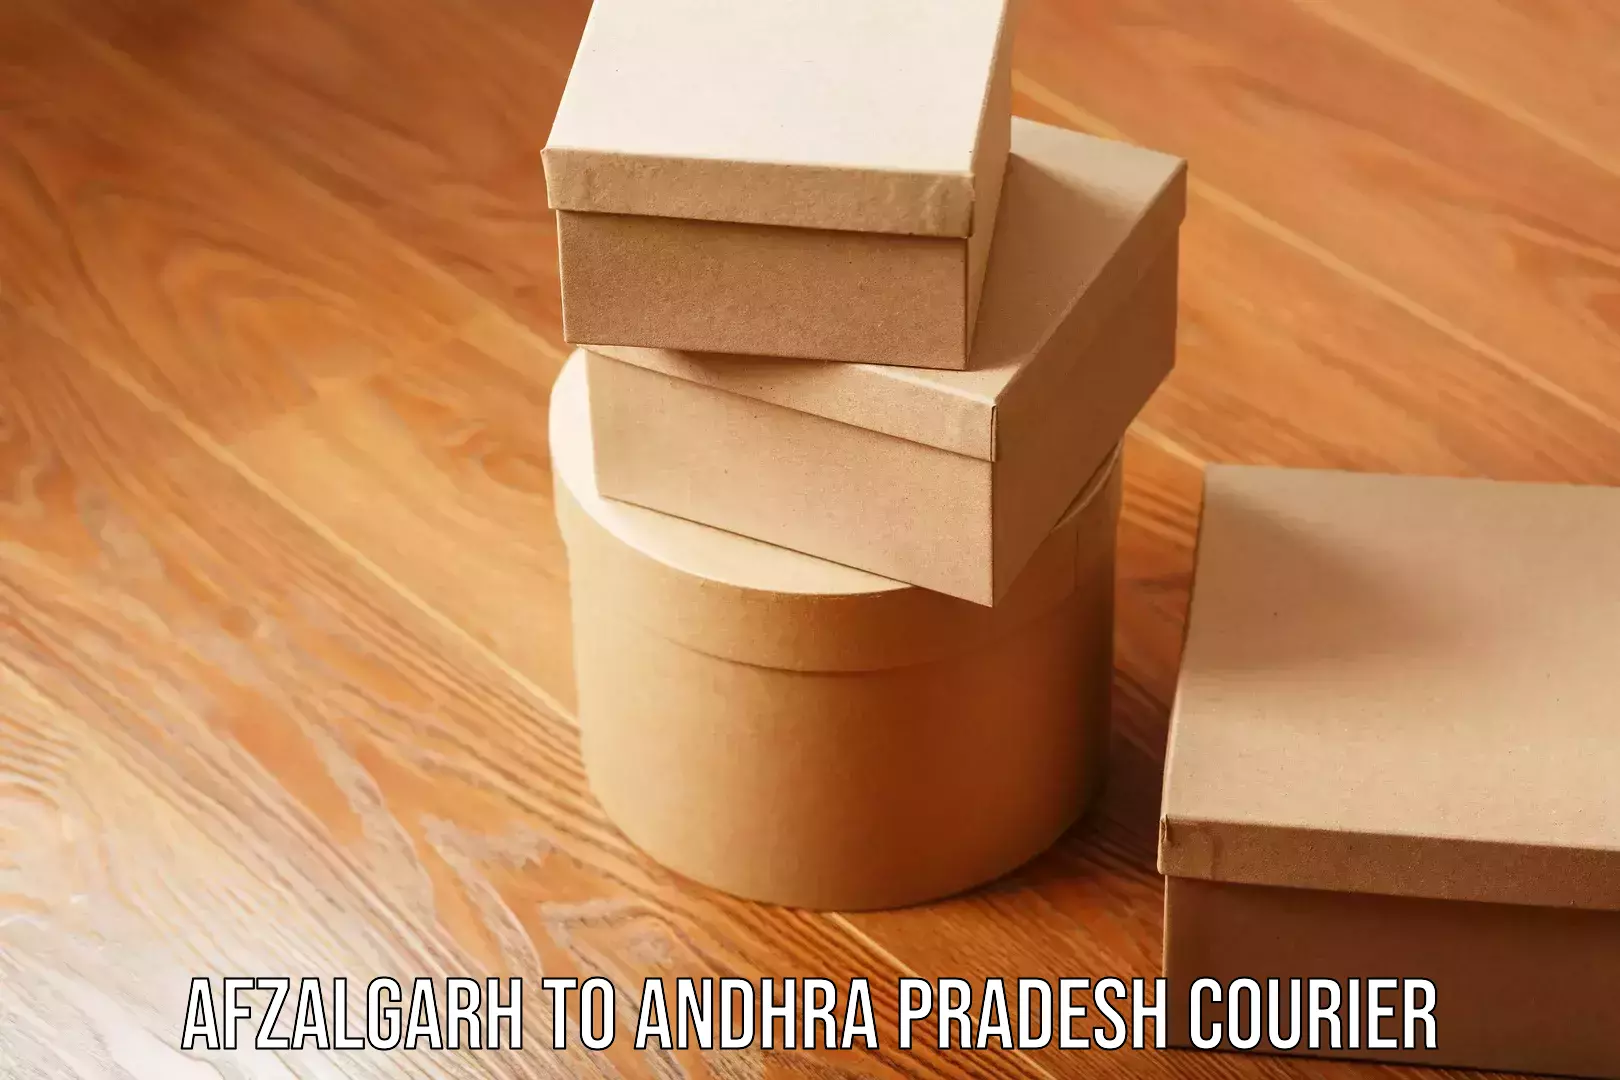 Sustainable shipping practices Afzalgarh to Andhra Pradesh